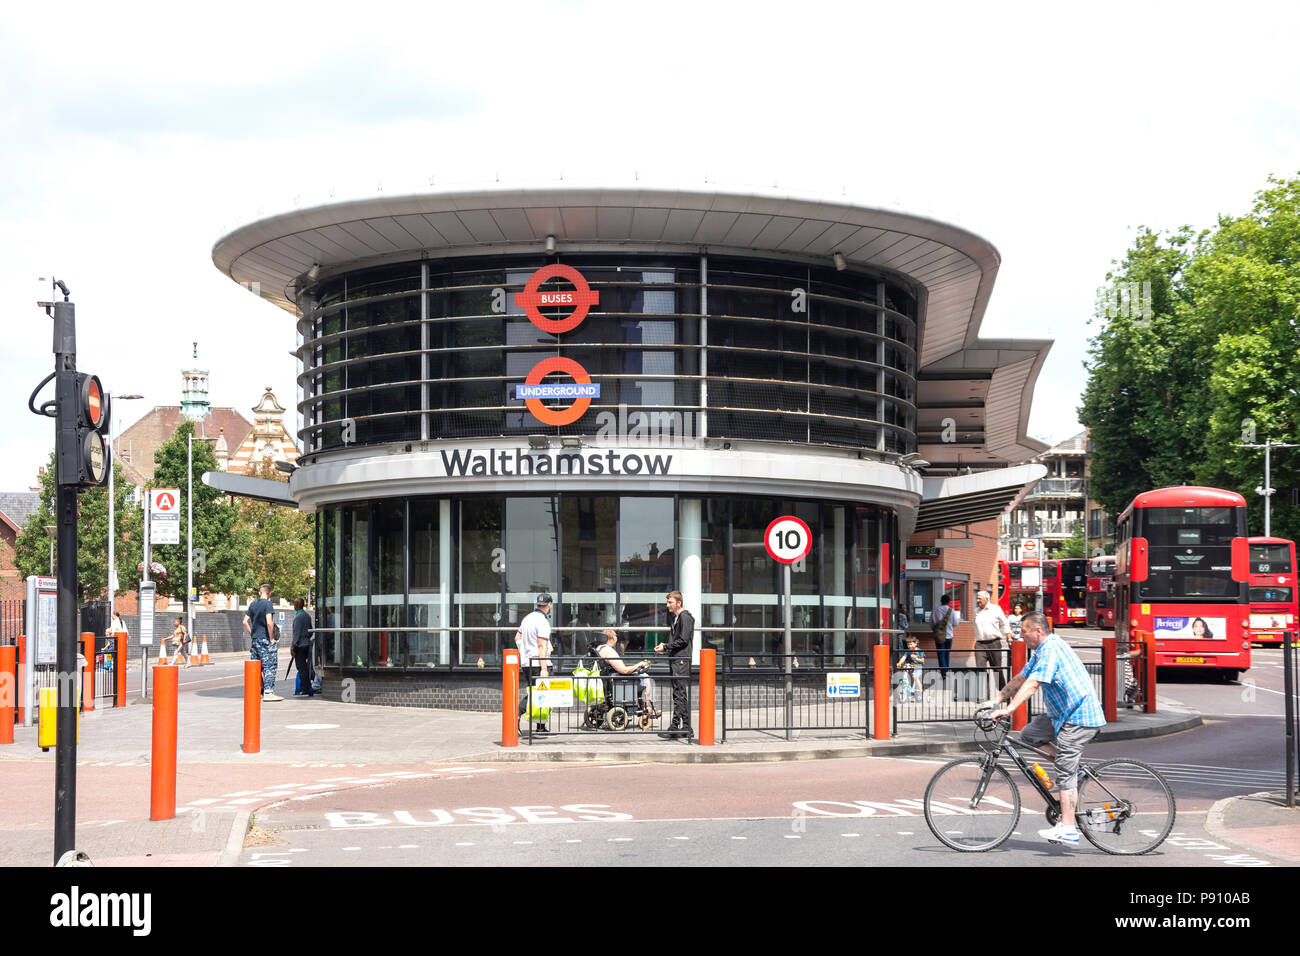 Walthamstow Bus and Underground Station, Selbourne Road, Walthamstow, London Borough of Waltham Forest, Greater London, England, United Kingdom Stock Photo